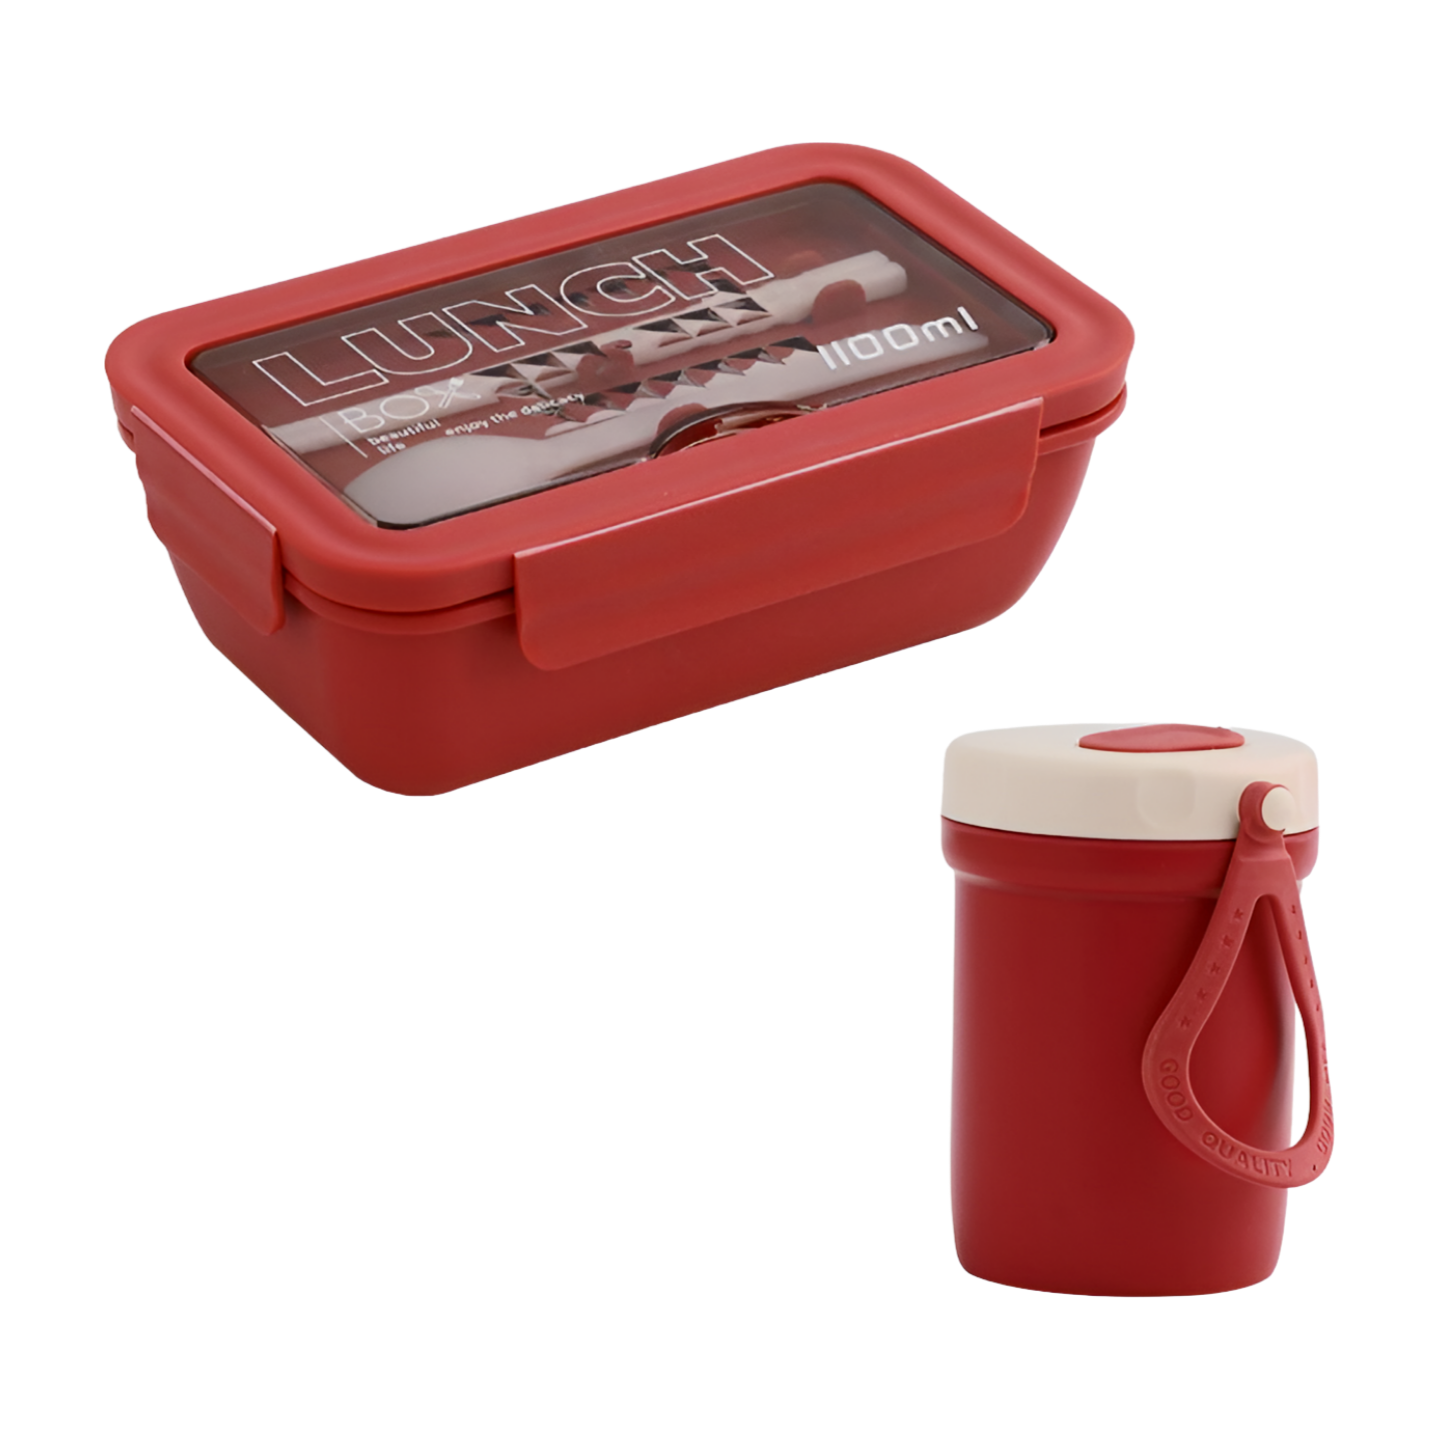 LLD12488 4 Compartment Lunch Boxes 400 Pack: Microwave Safe Meal